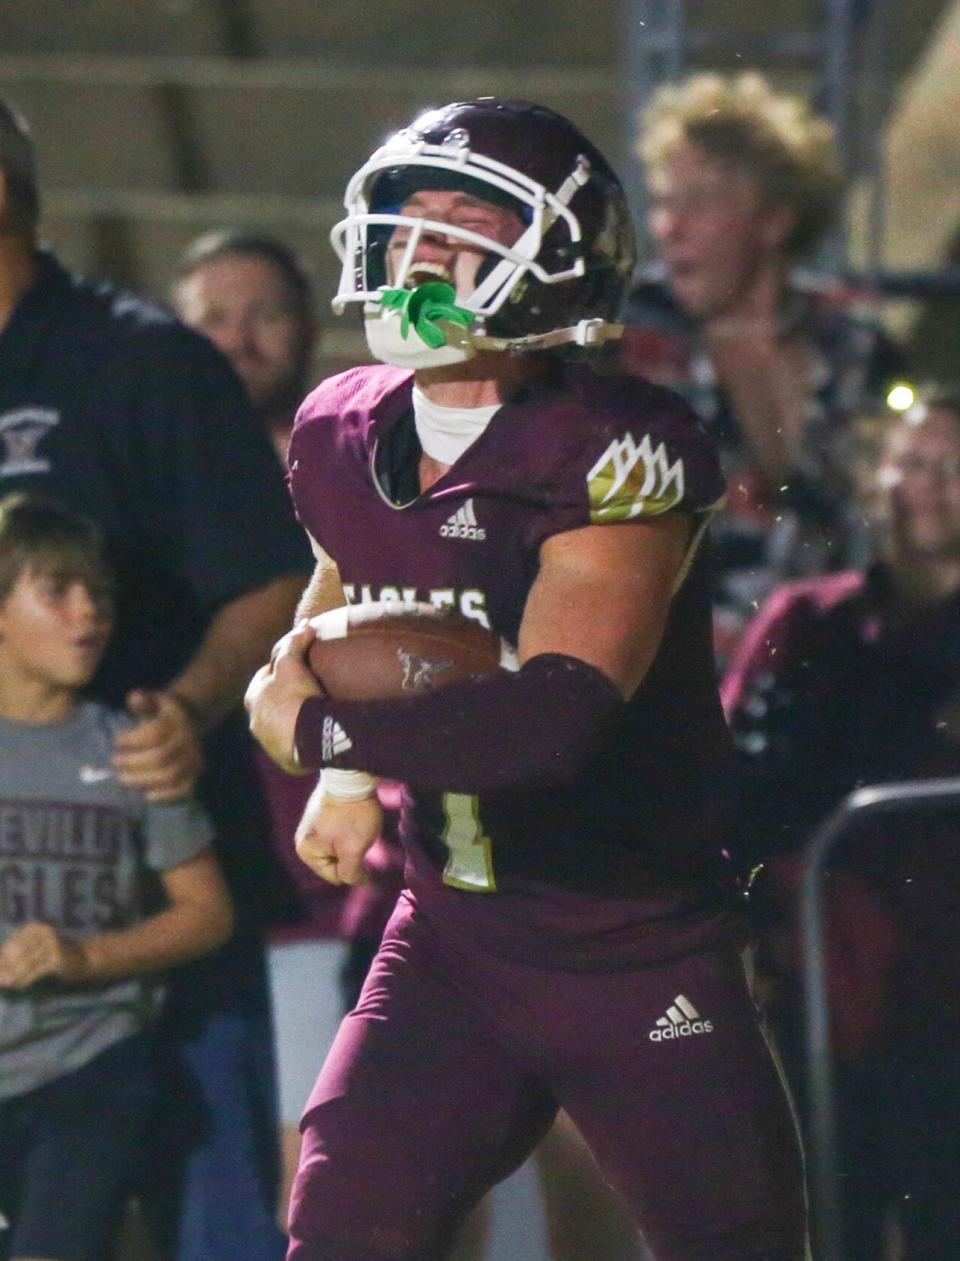 MAddax Fayard celebrates a touchdown as Niceville hosts North Miami in the season home opener.